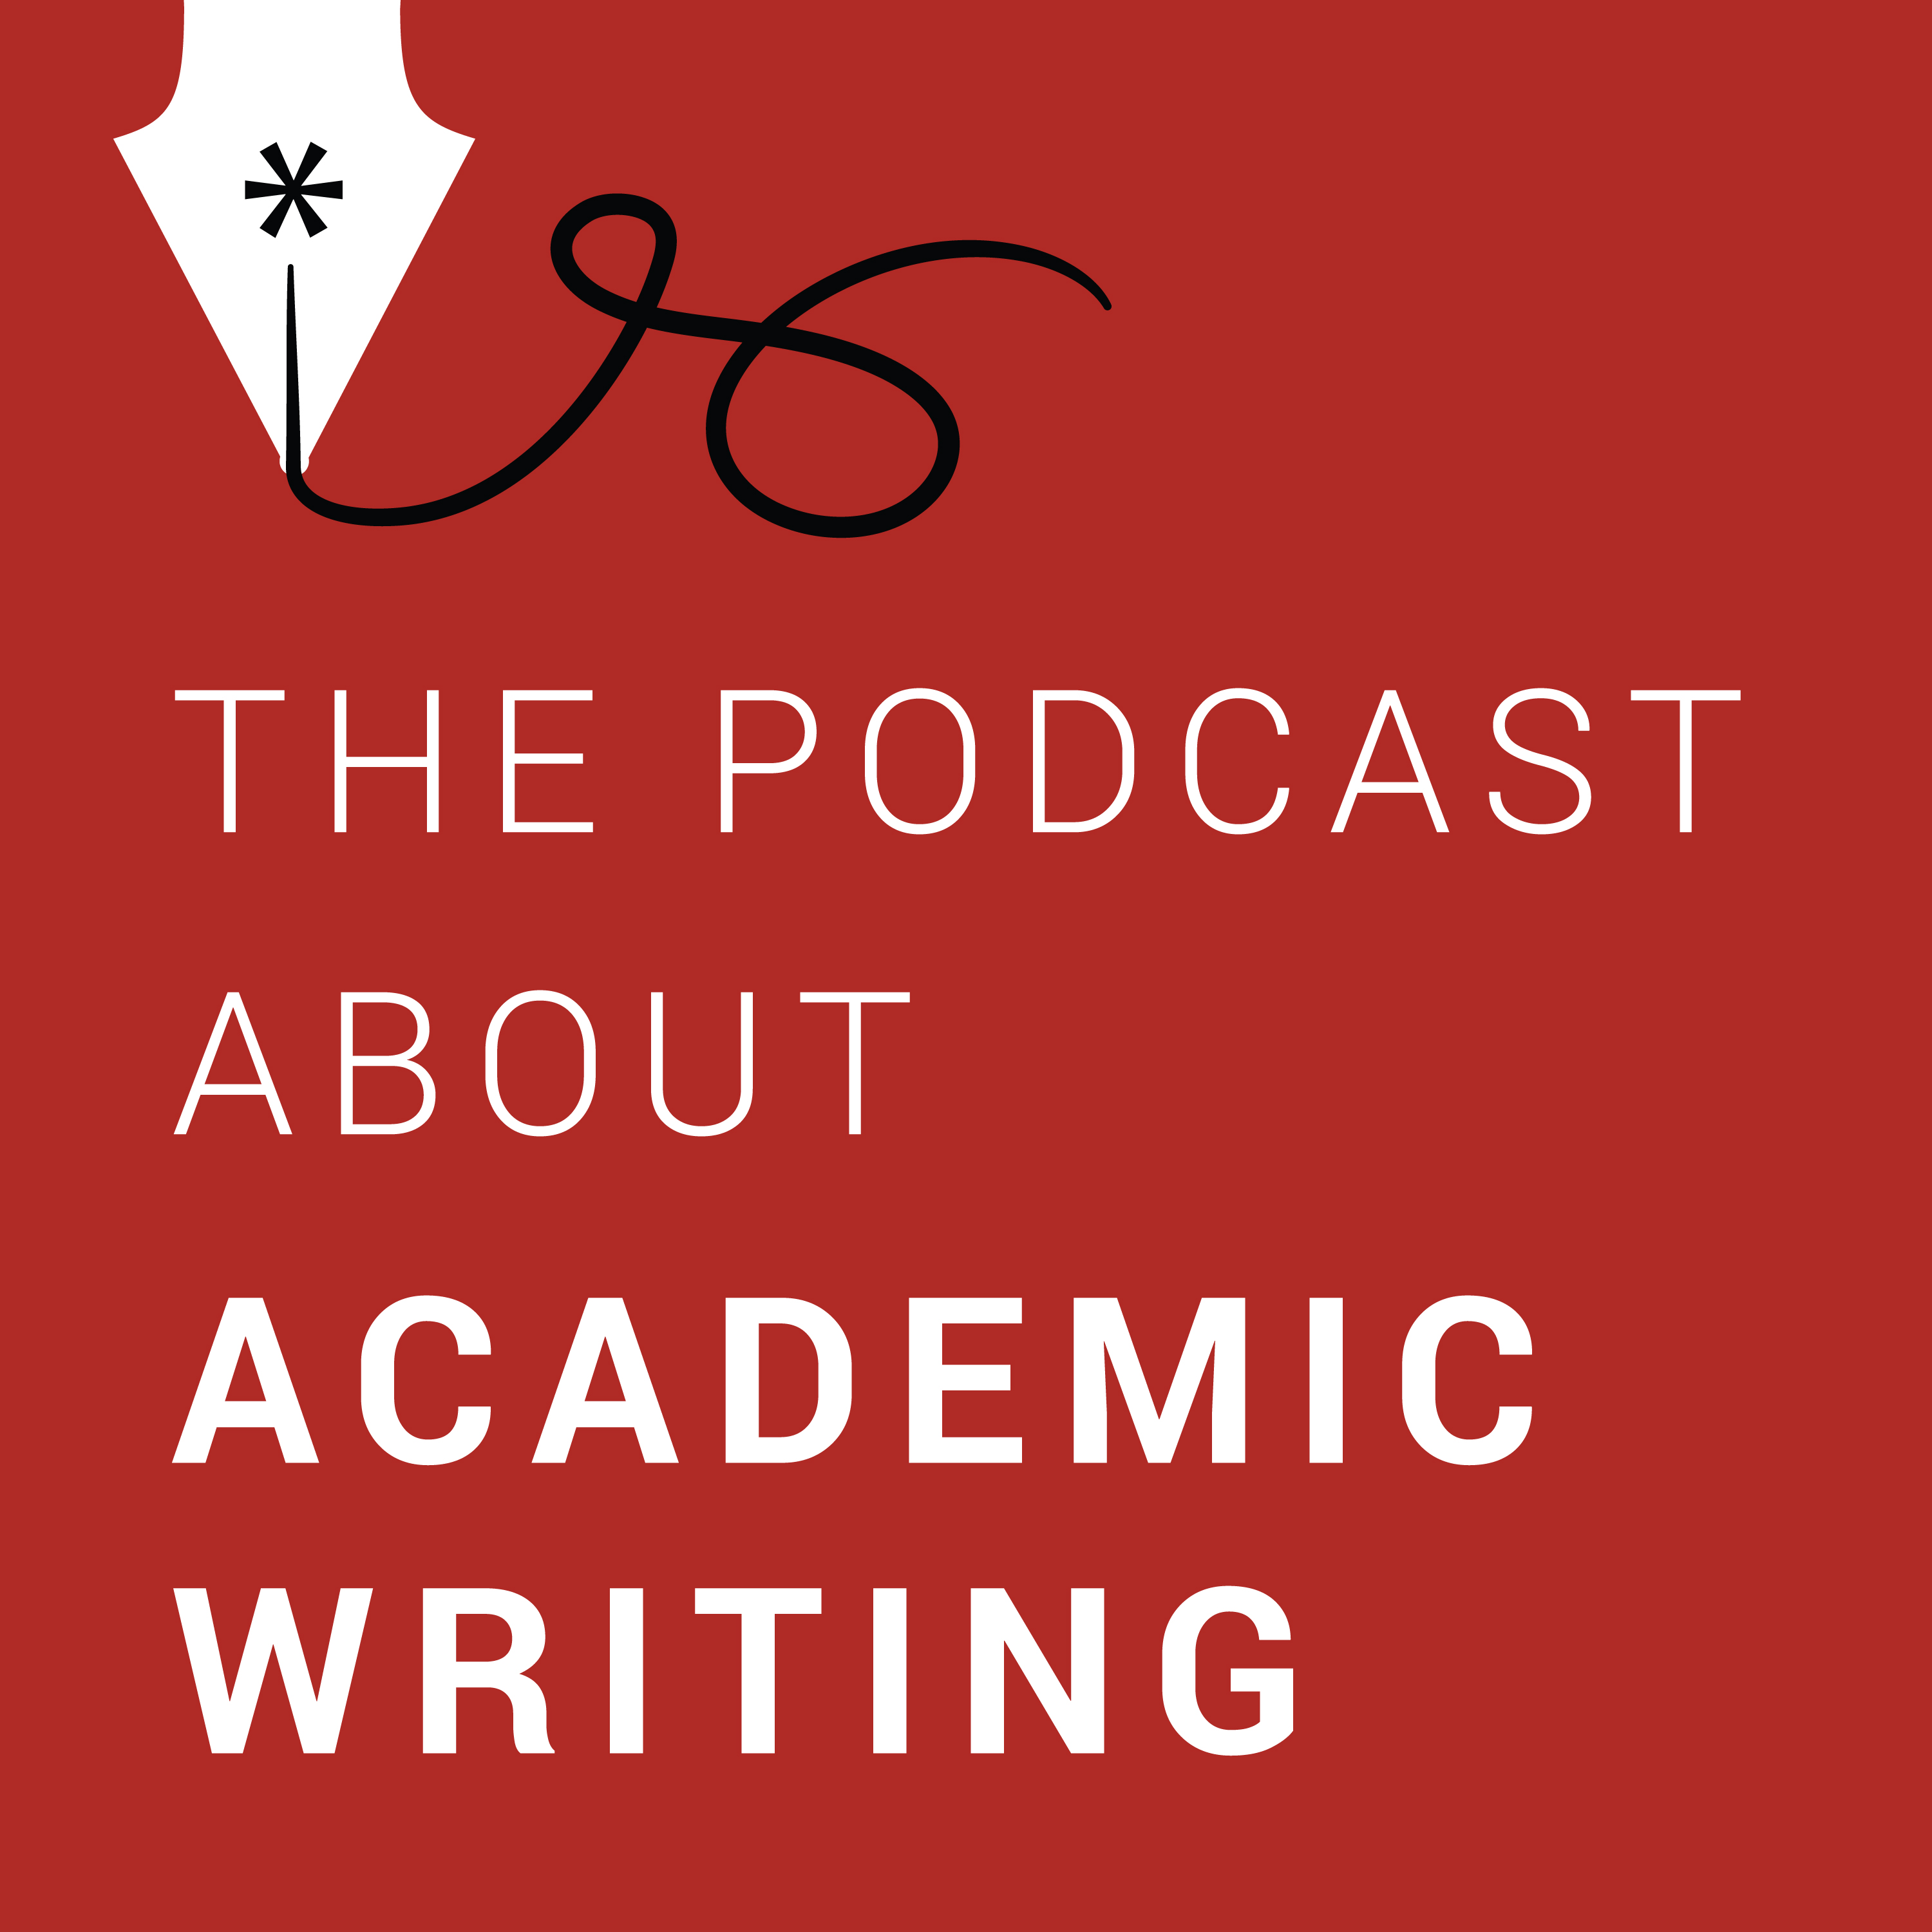 Academic writing - The podcast about academic writing artwork